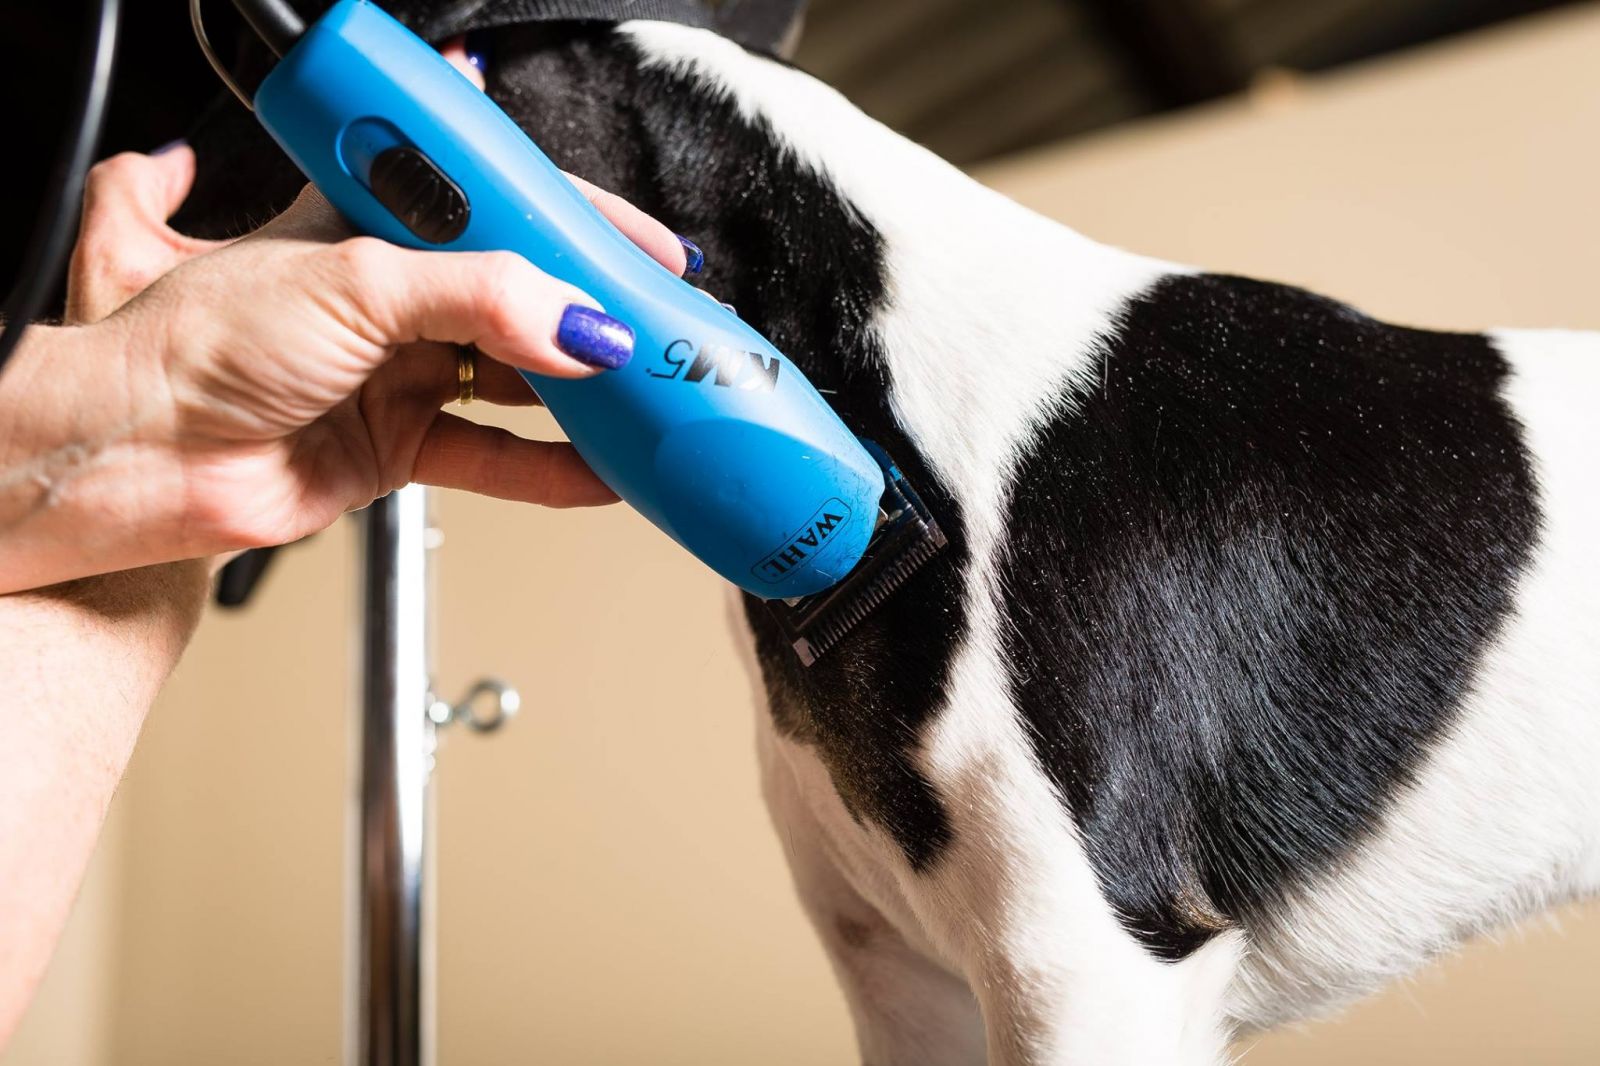 grooming your dog with clippers